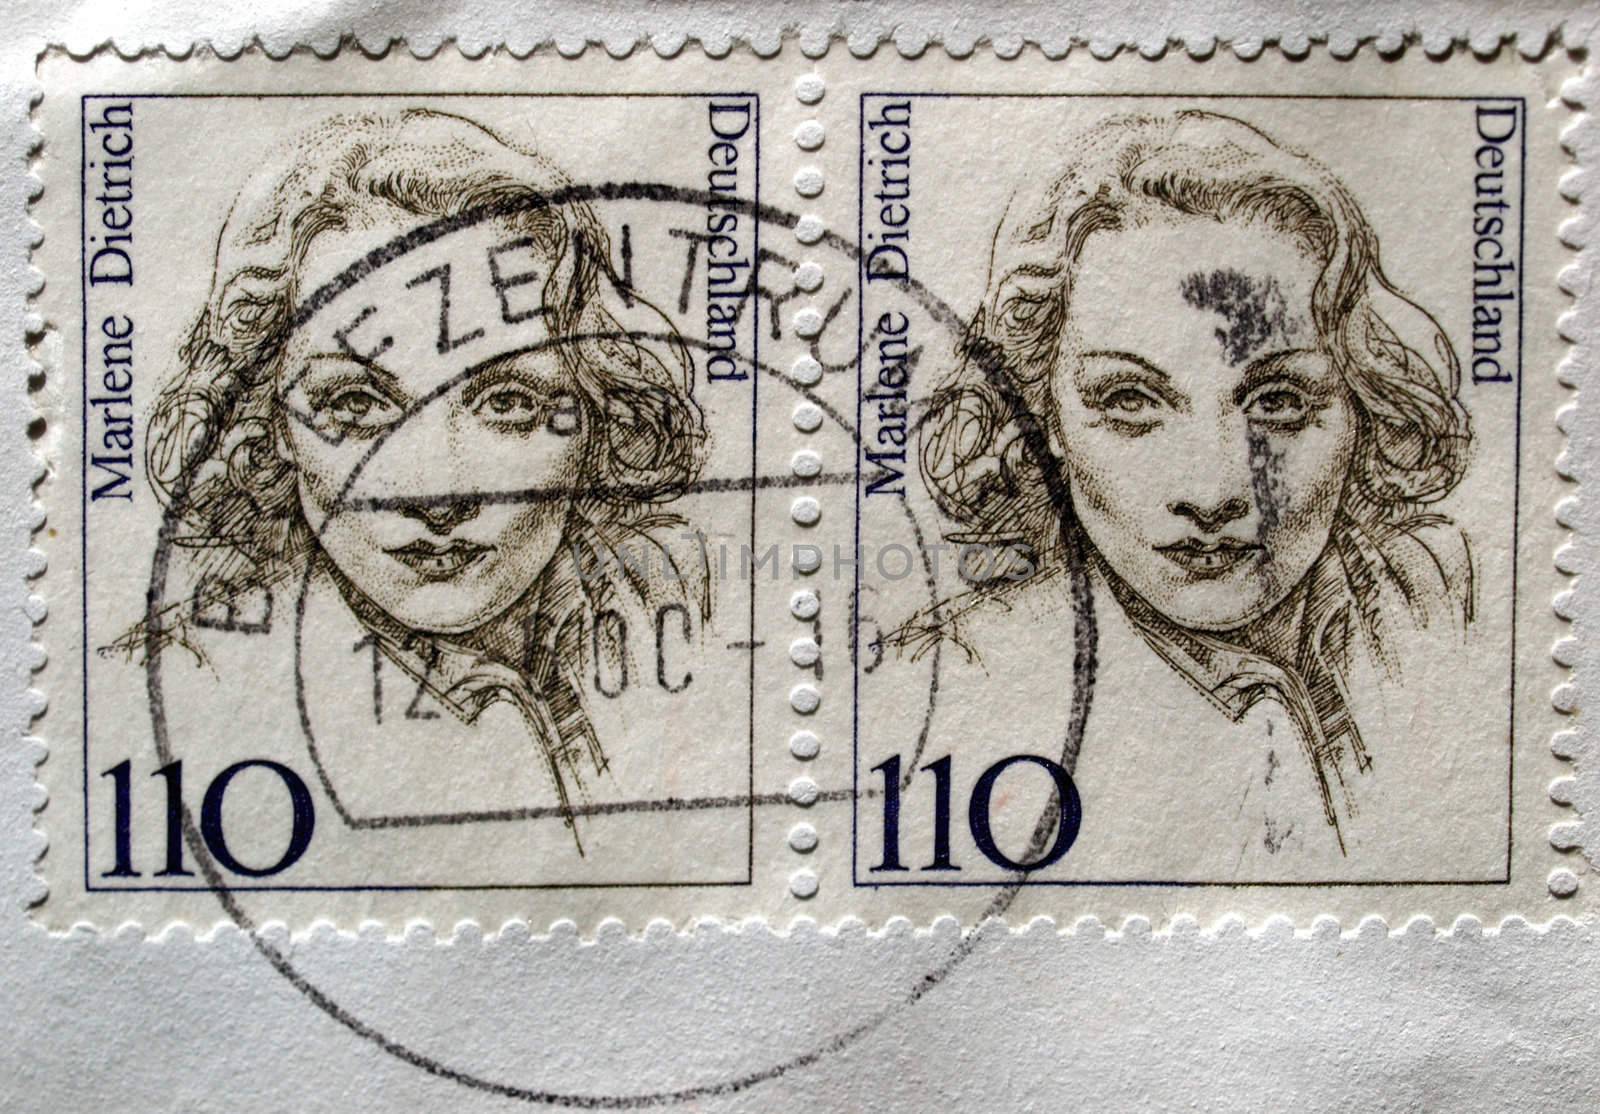 Range of German postage stamps from Germany